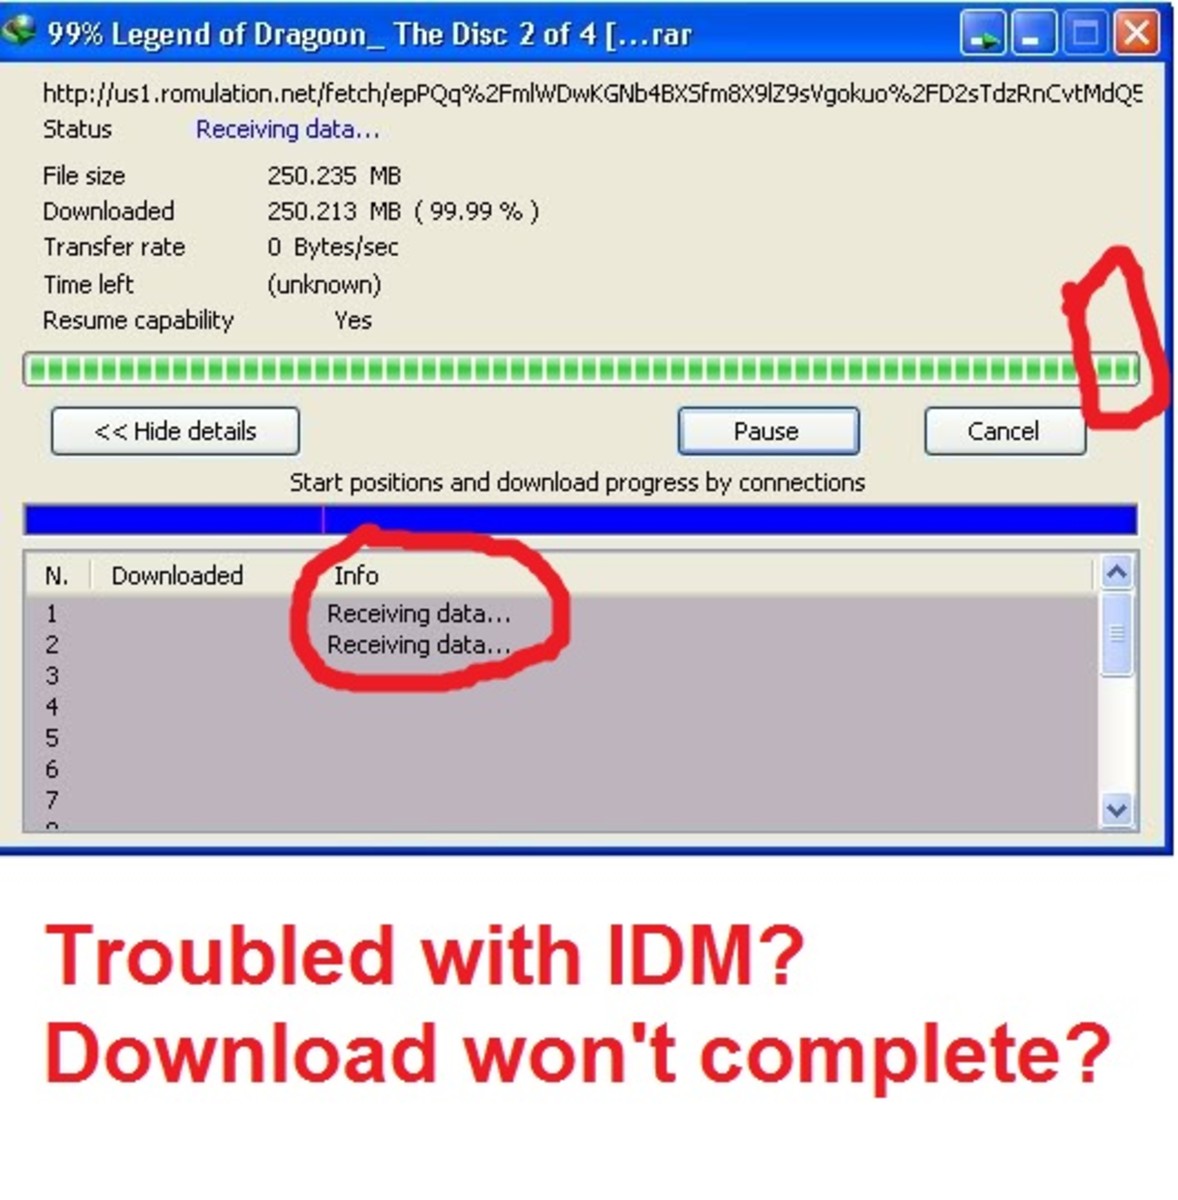 How to Fix and Continue Broken or Corrupted IDM Downloads